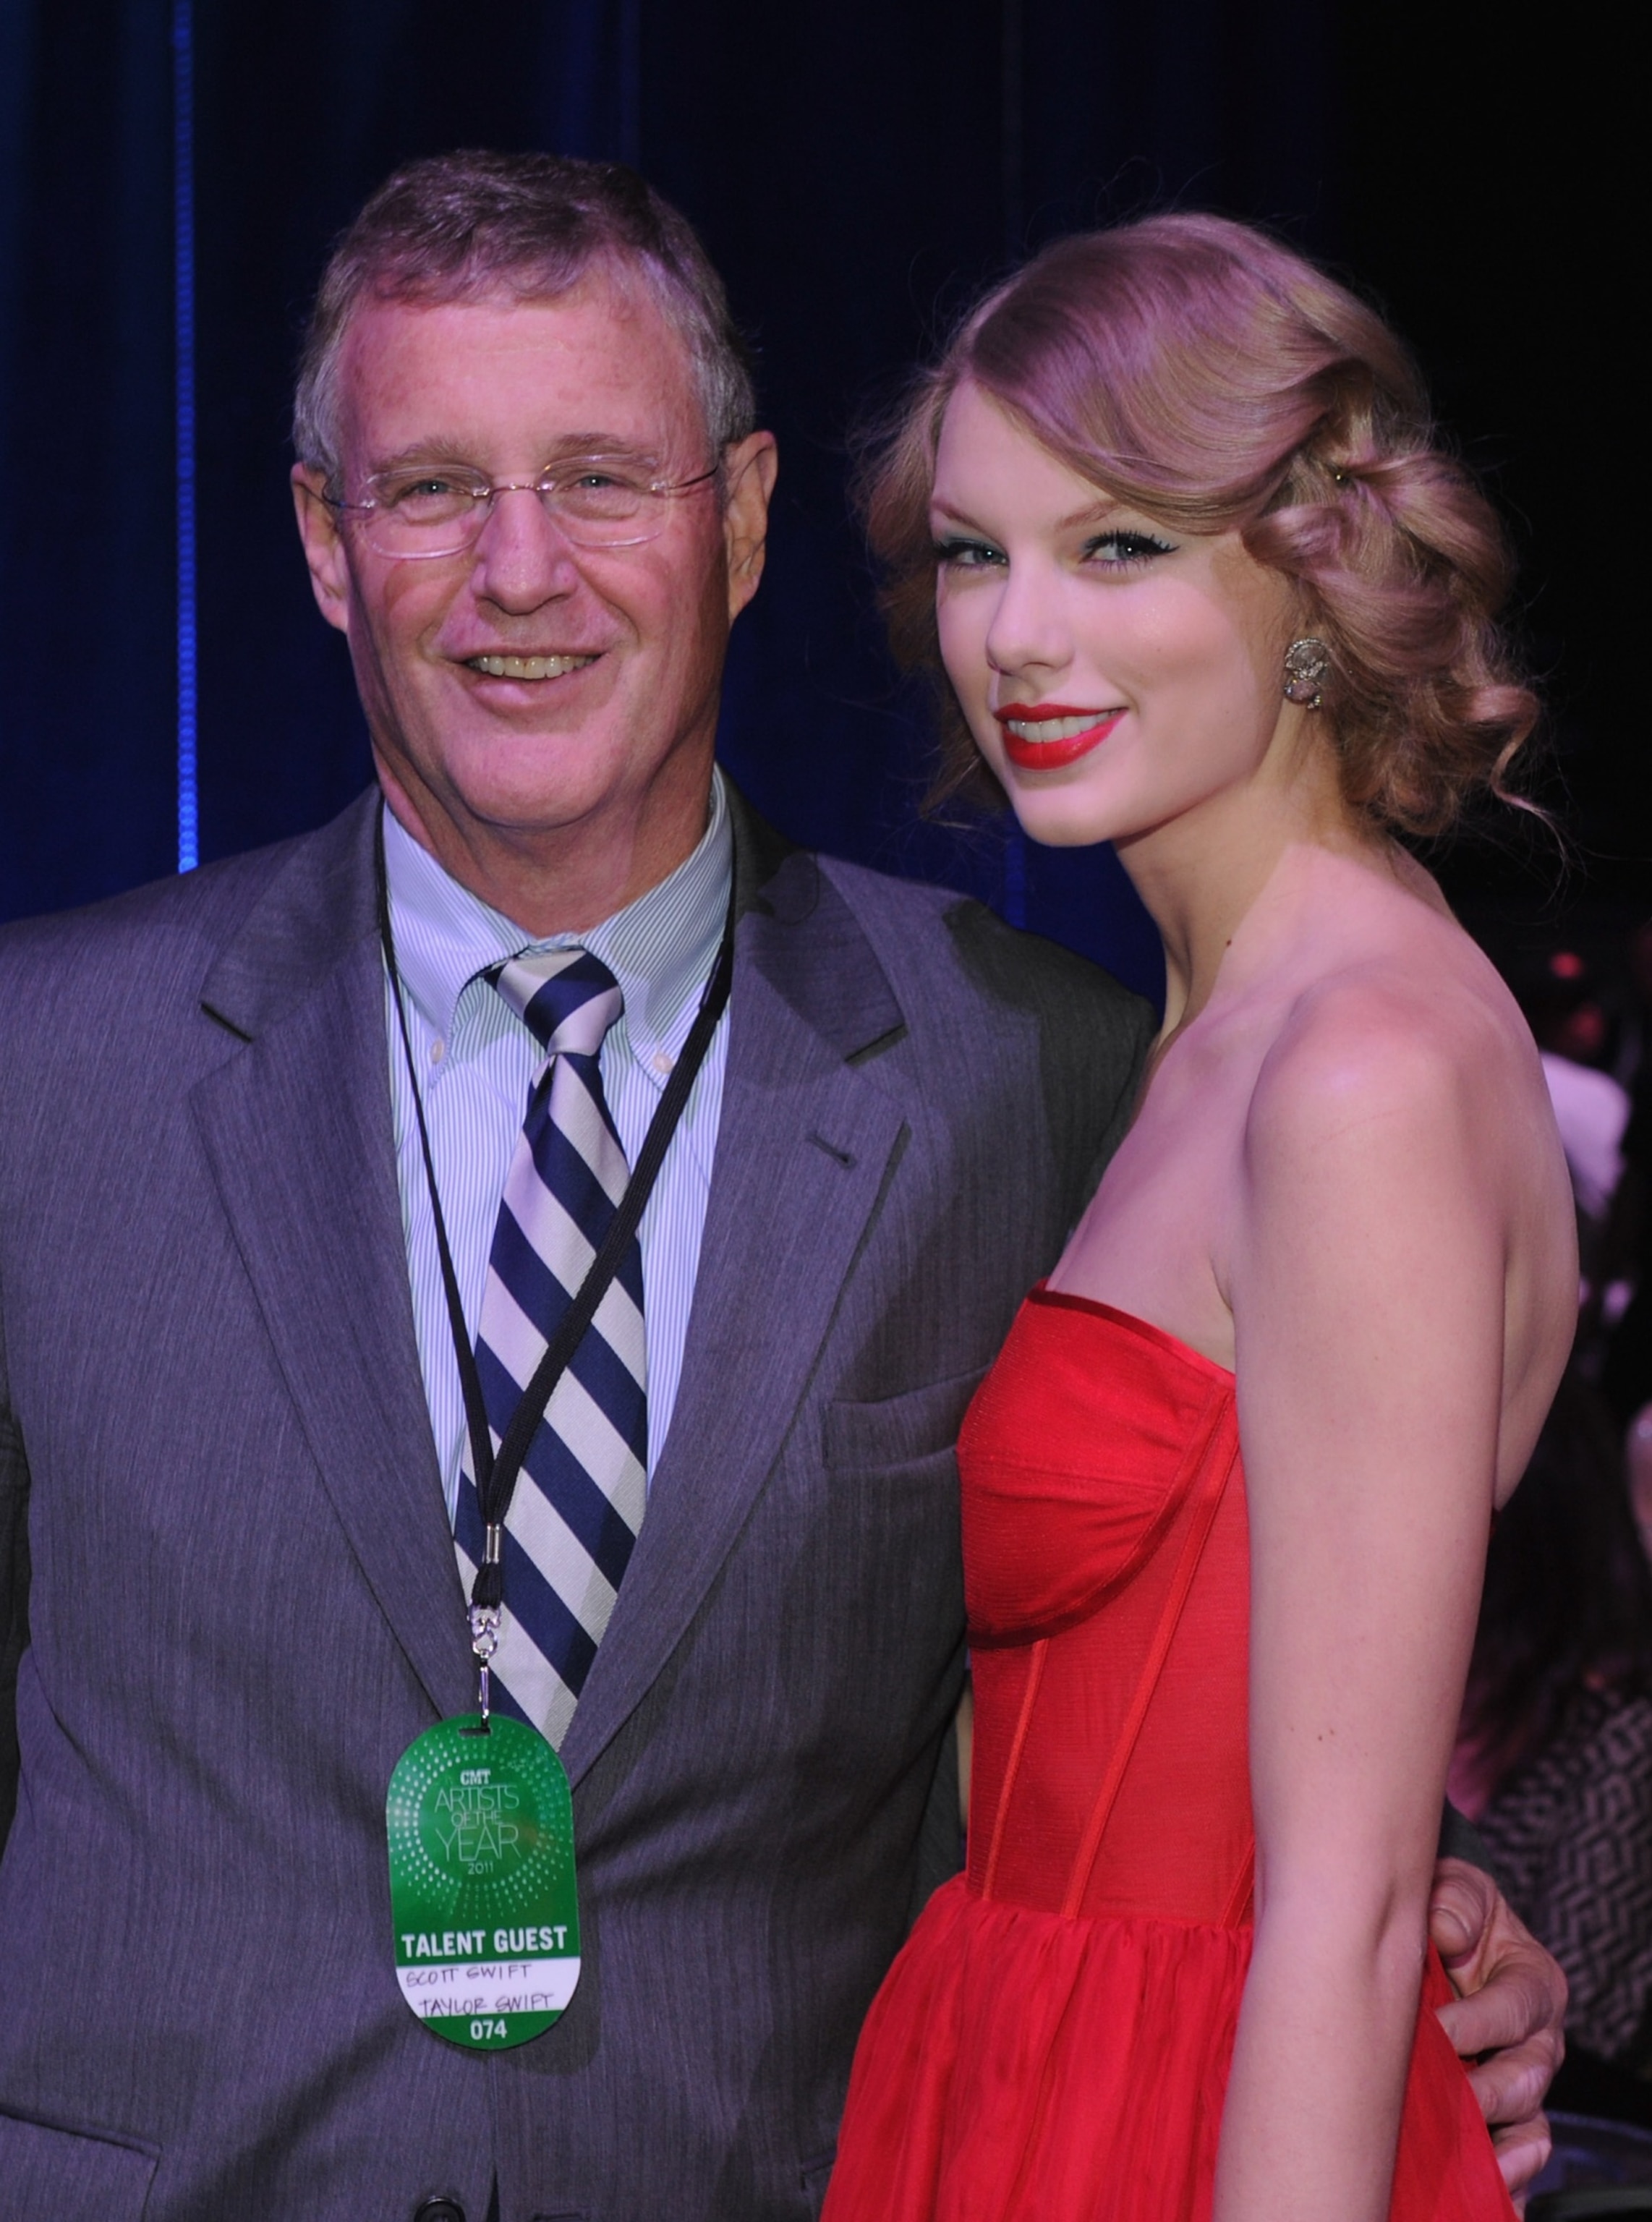 PHOTO: Scott Swift and Taylor Swift at the 2011 CMT Artists of the year celebration at the Bridgestone Arena on Nov. 29, 2011 in Nashville, Tenn.